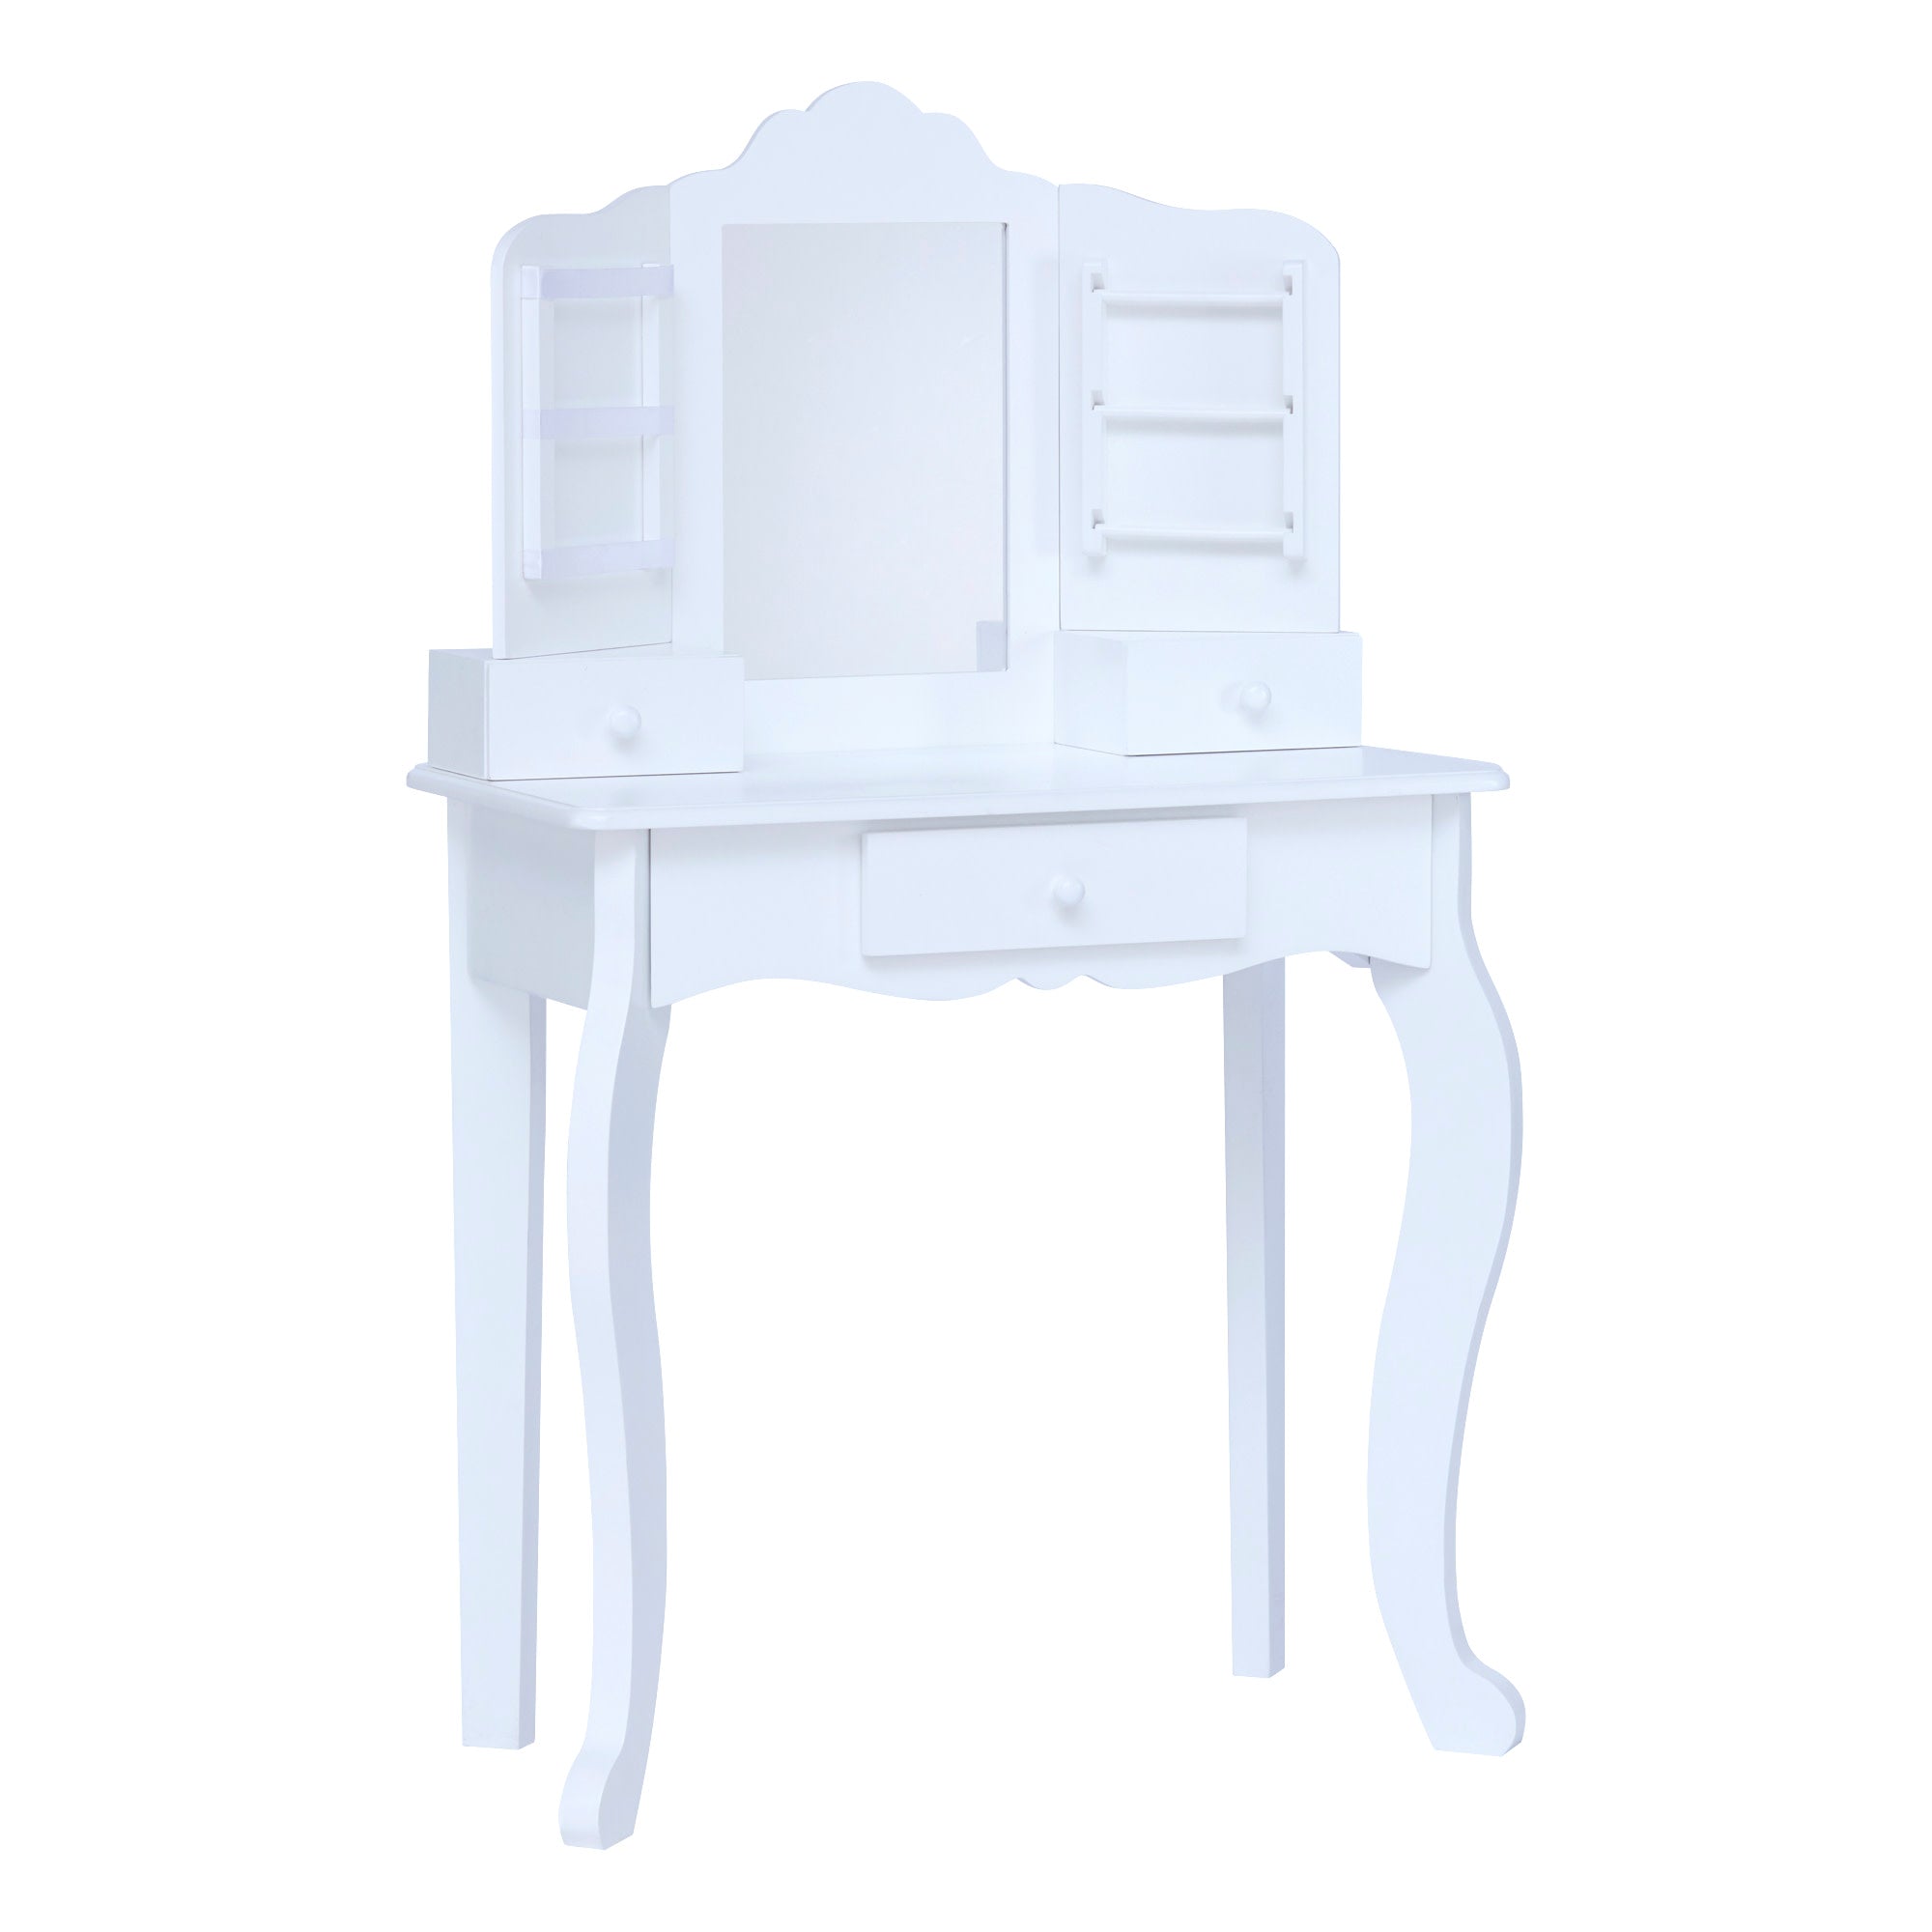 Fantasy Fields Little Princess Anna Vanity Set with Mirror, Drawers, Jewelry Storage, and Stool, White